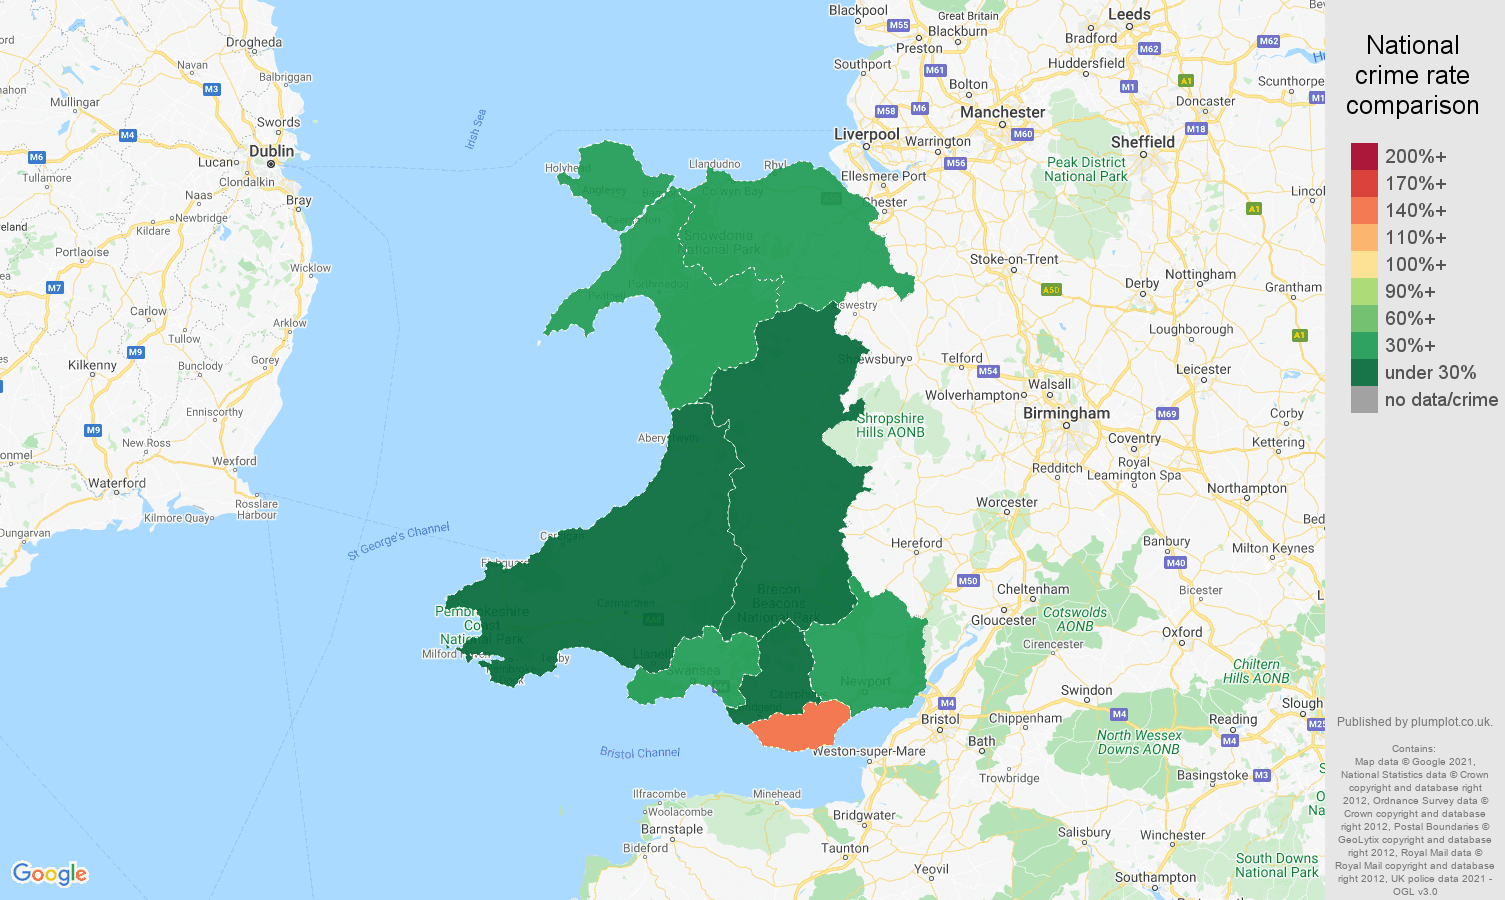 Wales bicycle theft crime rate comparison map